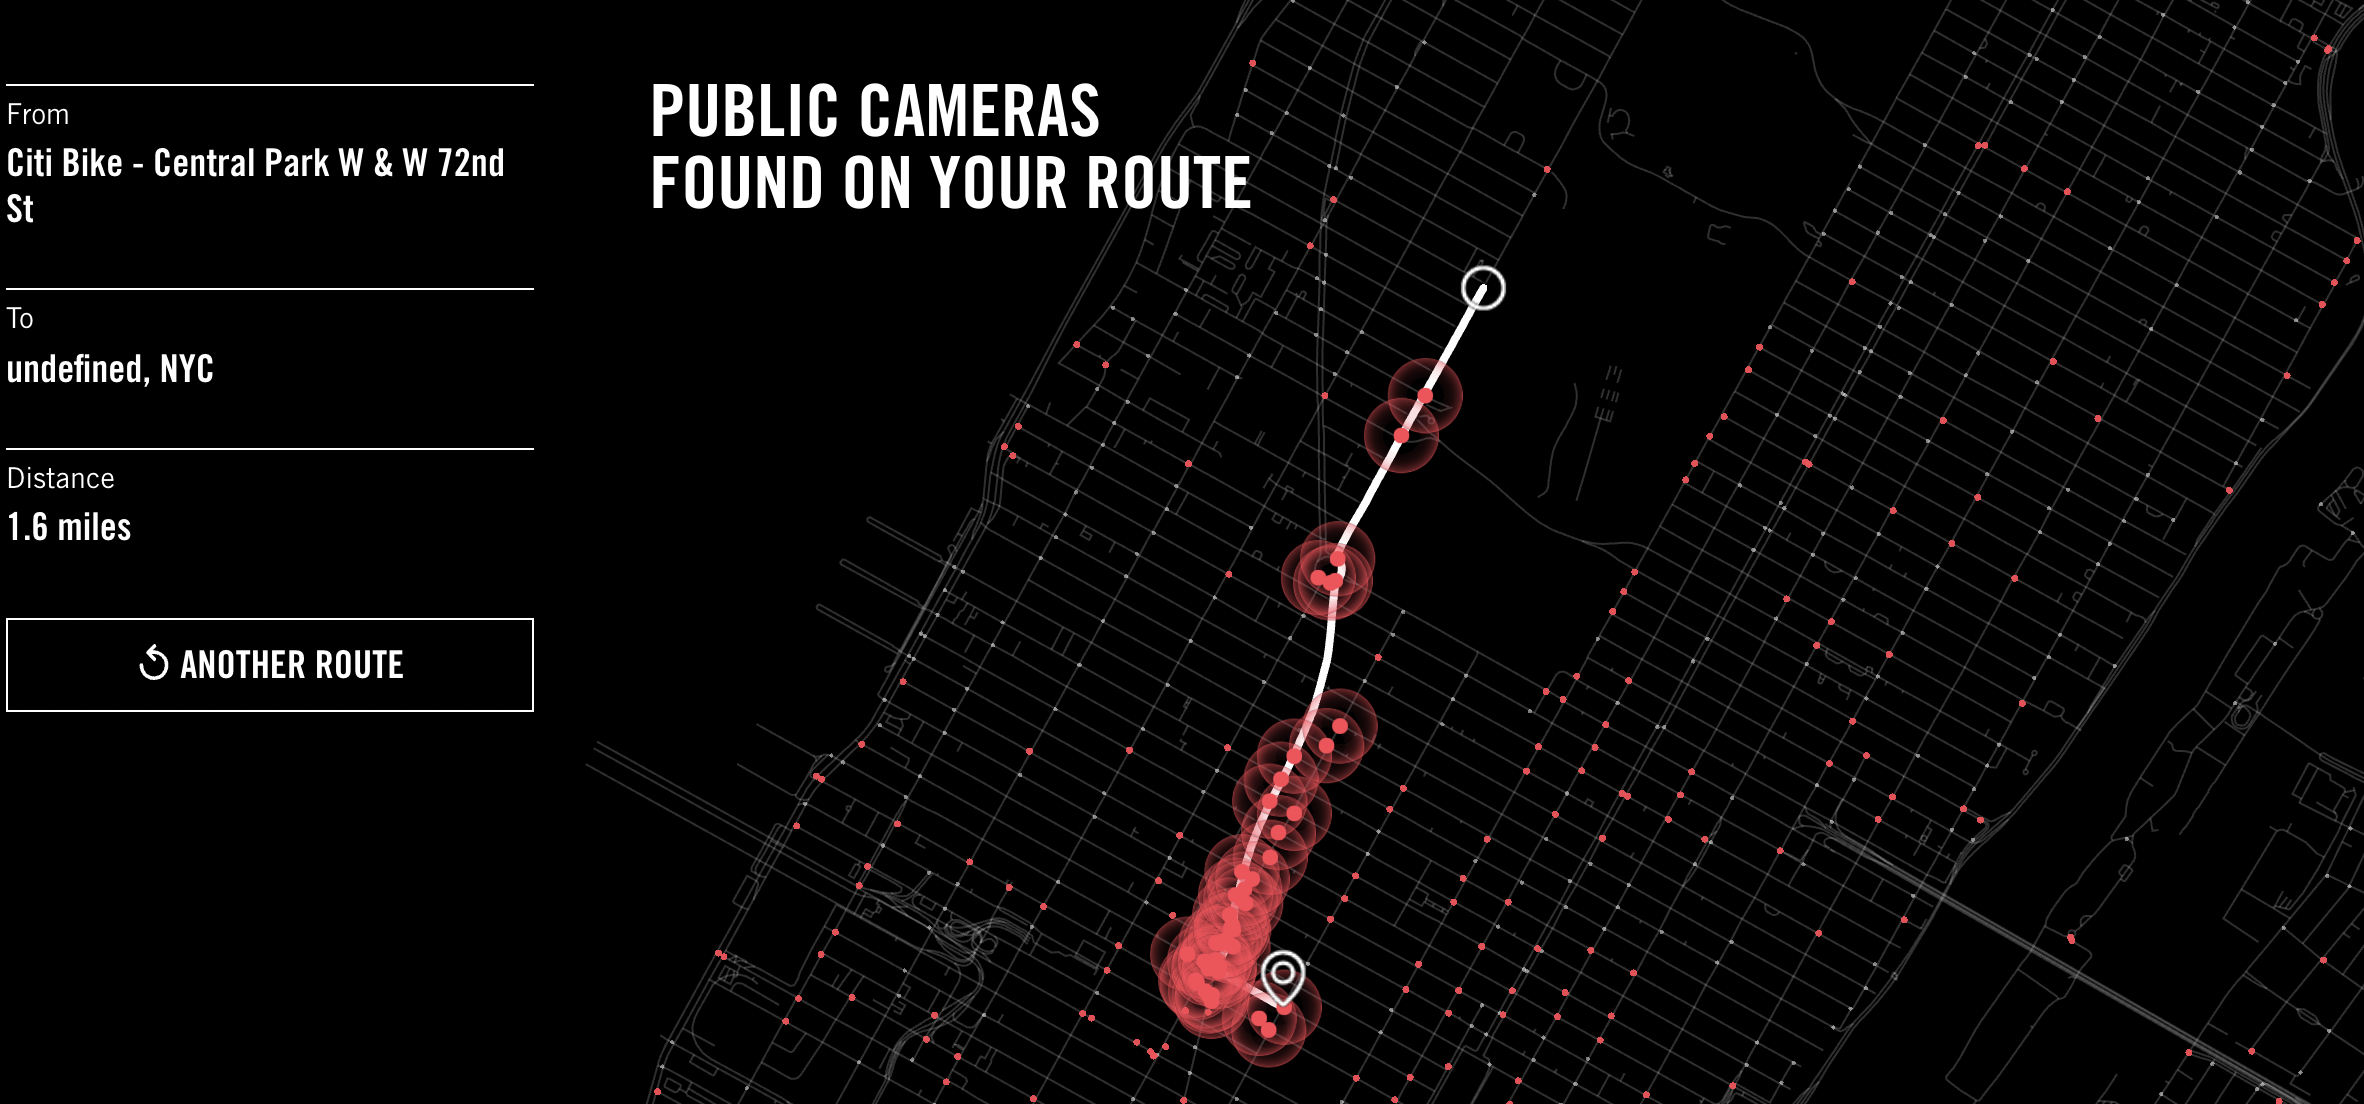 Here’s the Oppressive Surveillance You’ll Face If You Protest in NYC